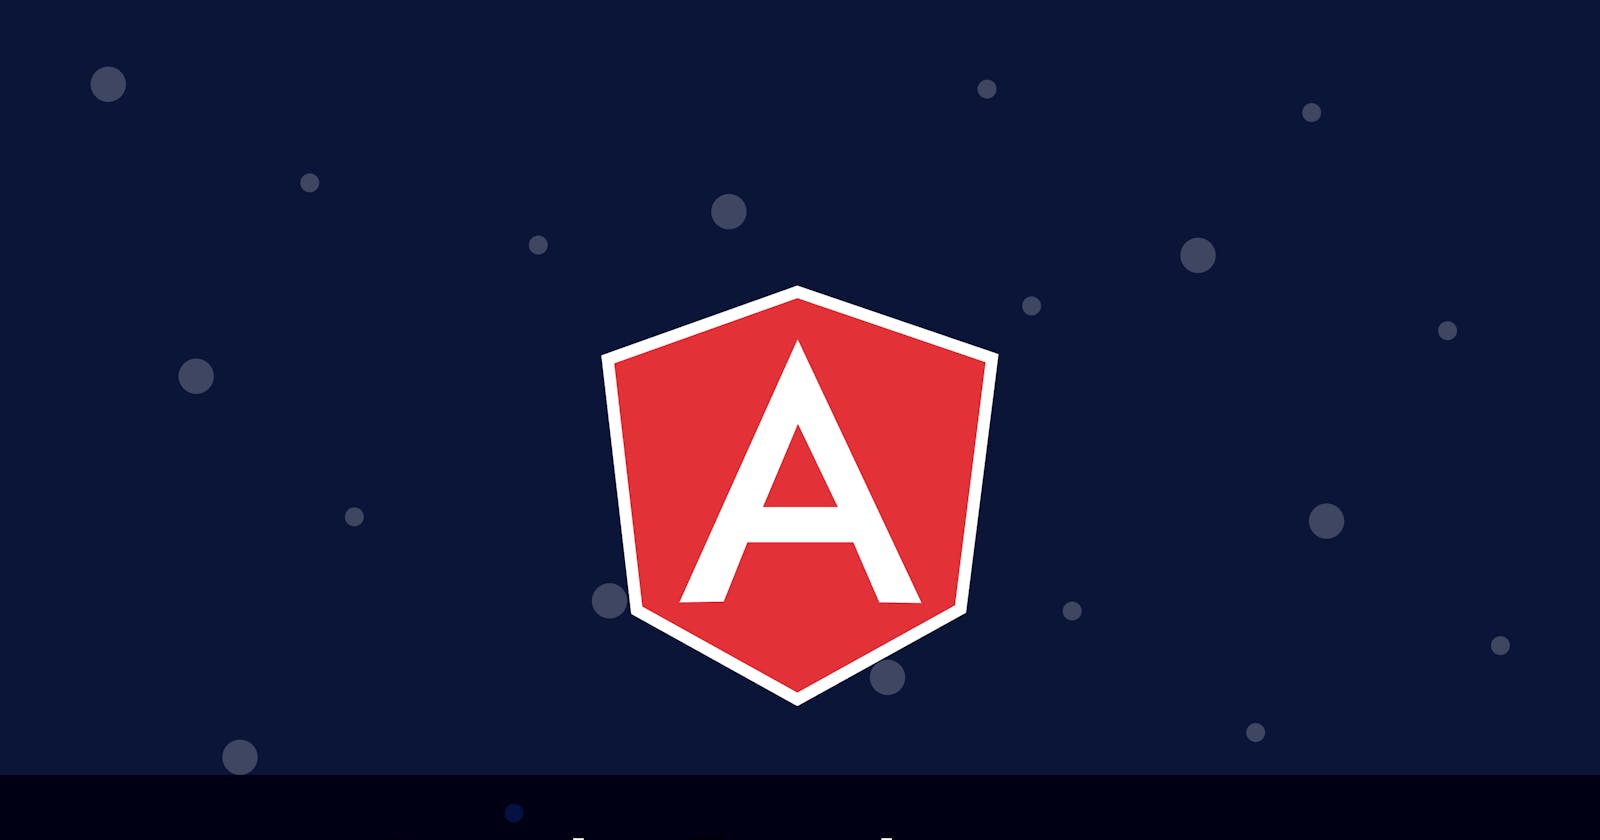 Angular Development: Building Modern Web Apps with Ease